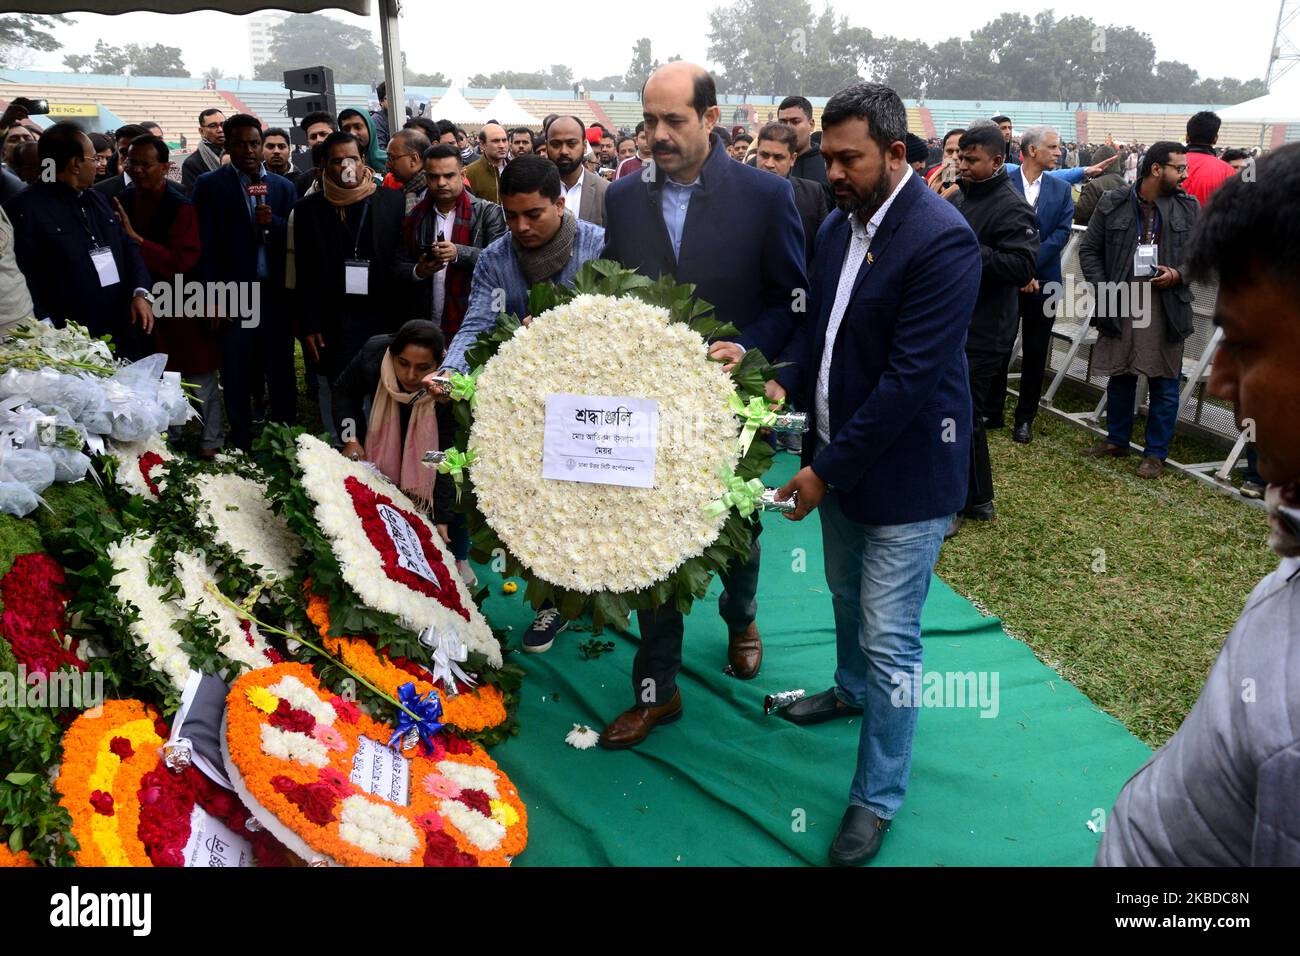 People pay their respects to the late Sir Fazle Hasan Abed, the founder of the Bangladesh Rural Advancement Committee (BRAC), in Dhaka, Bangladesh, on December 22, 2019. Thousands gathered in Bangladesh's capital on December 22 to attend the funeral of Sir Fazle Hasan Abed, founder of BRAC, one of the world's largest NGOs, to show their final respect. (Photo by Mamunur Rashid/NurPhoto) Stock Photo